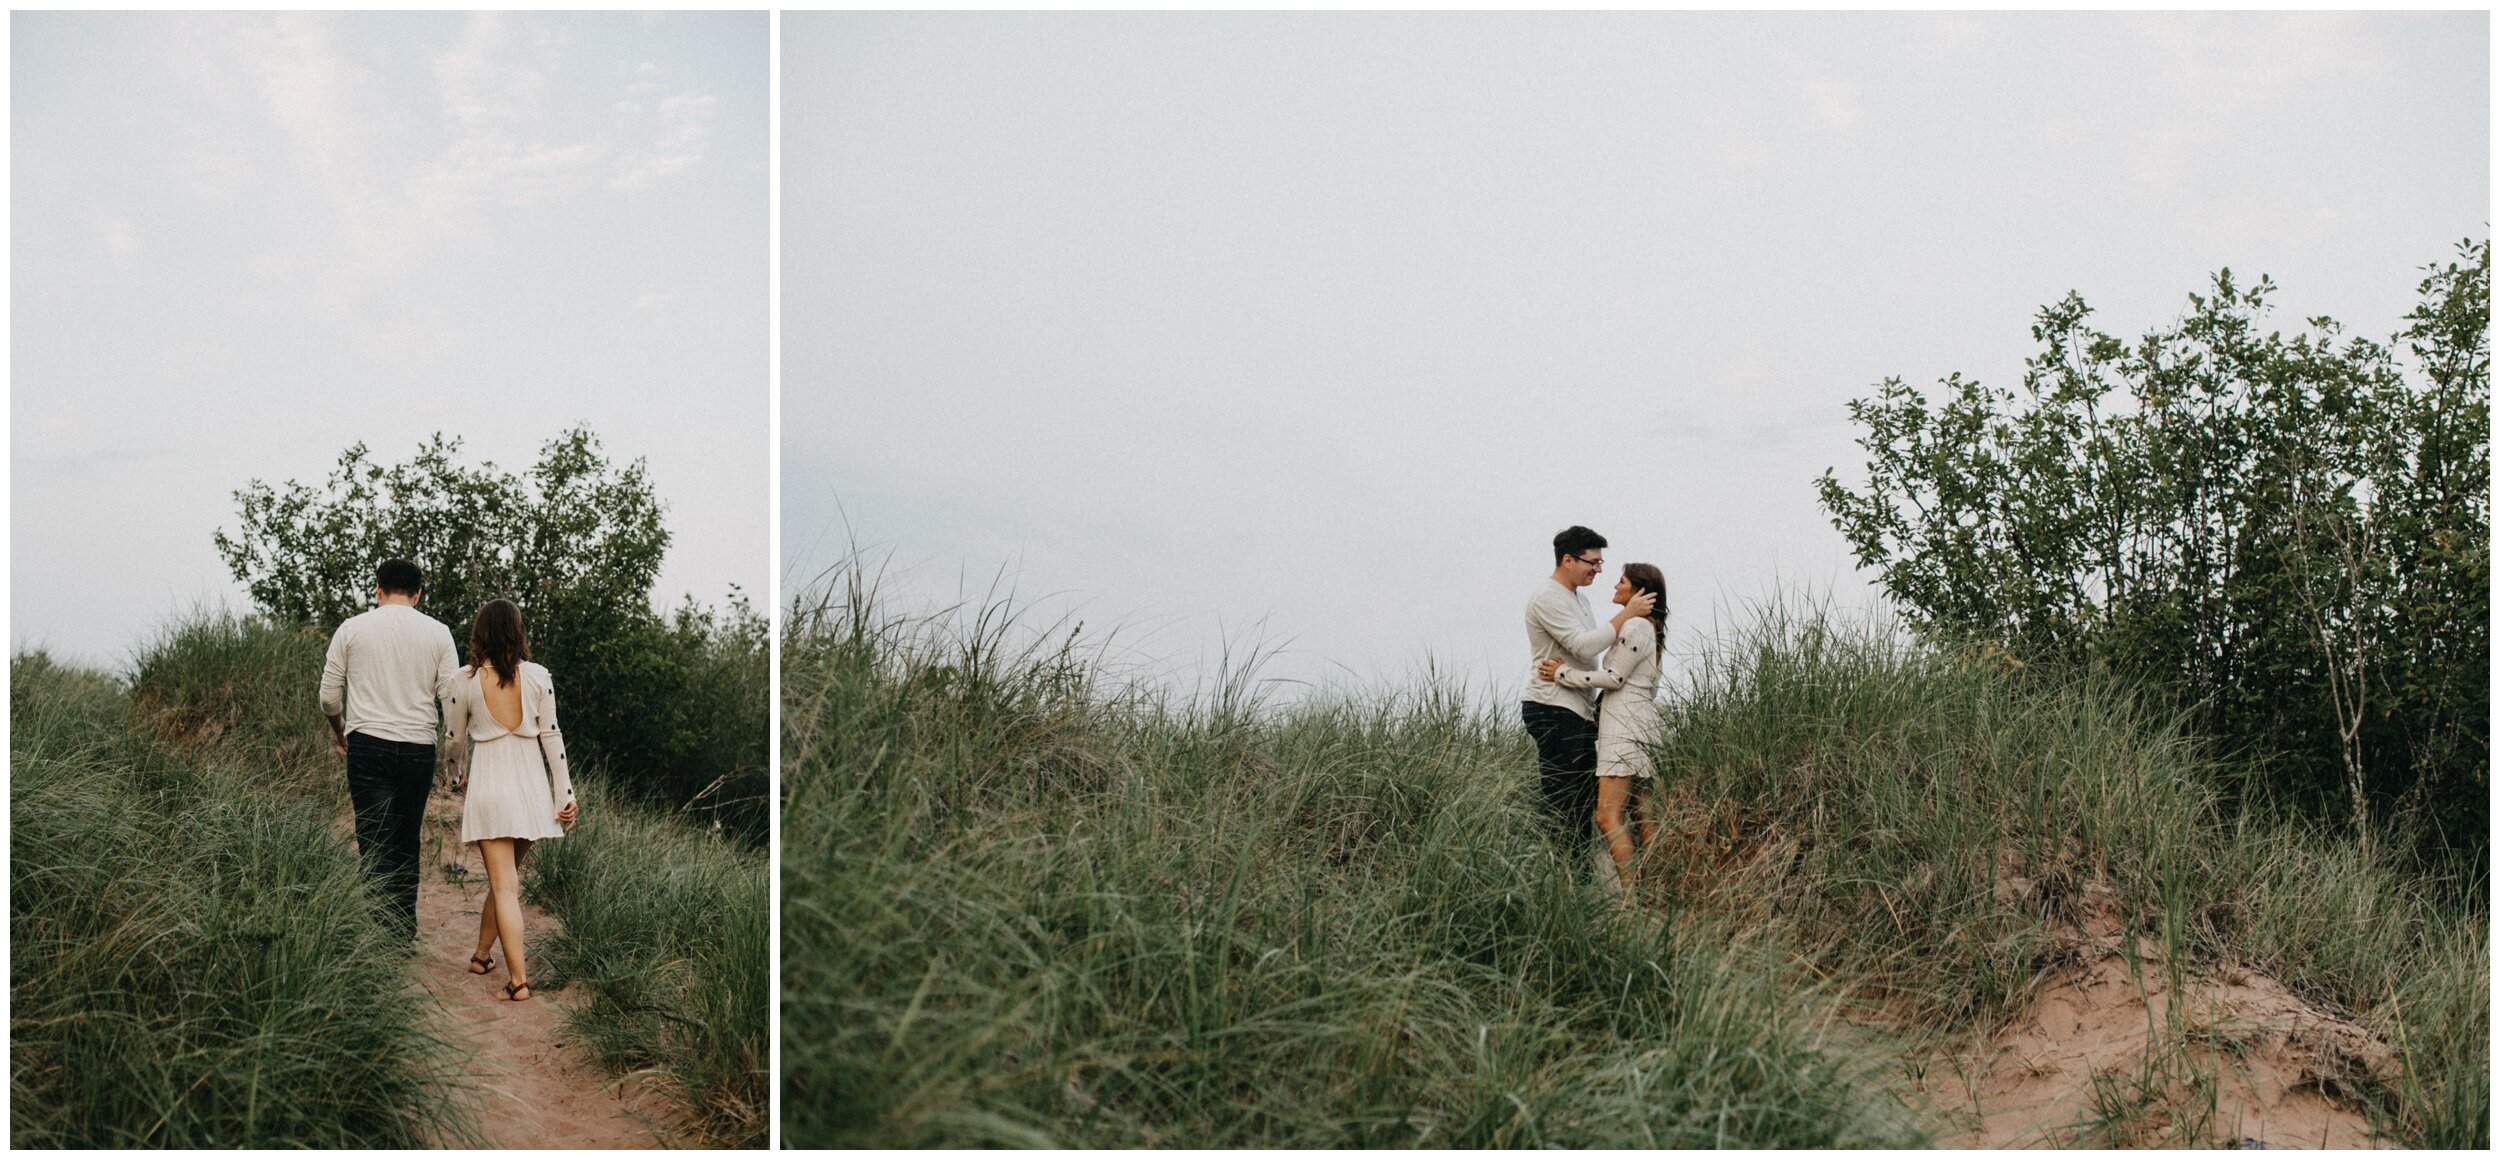 Couple standing on grassy sand dunes at park point beach in Duluth, Minnesota